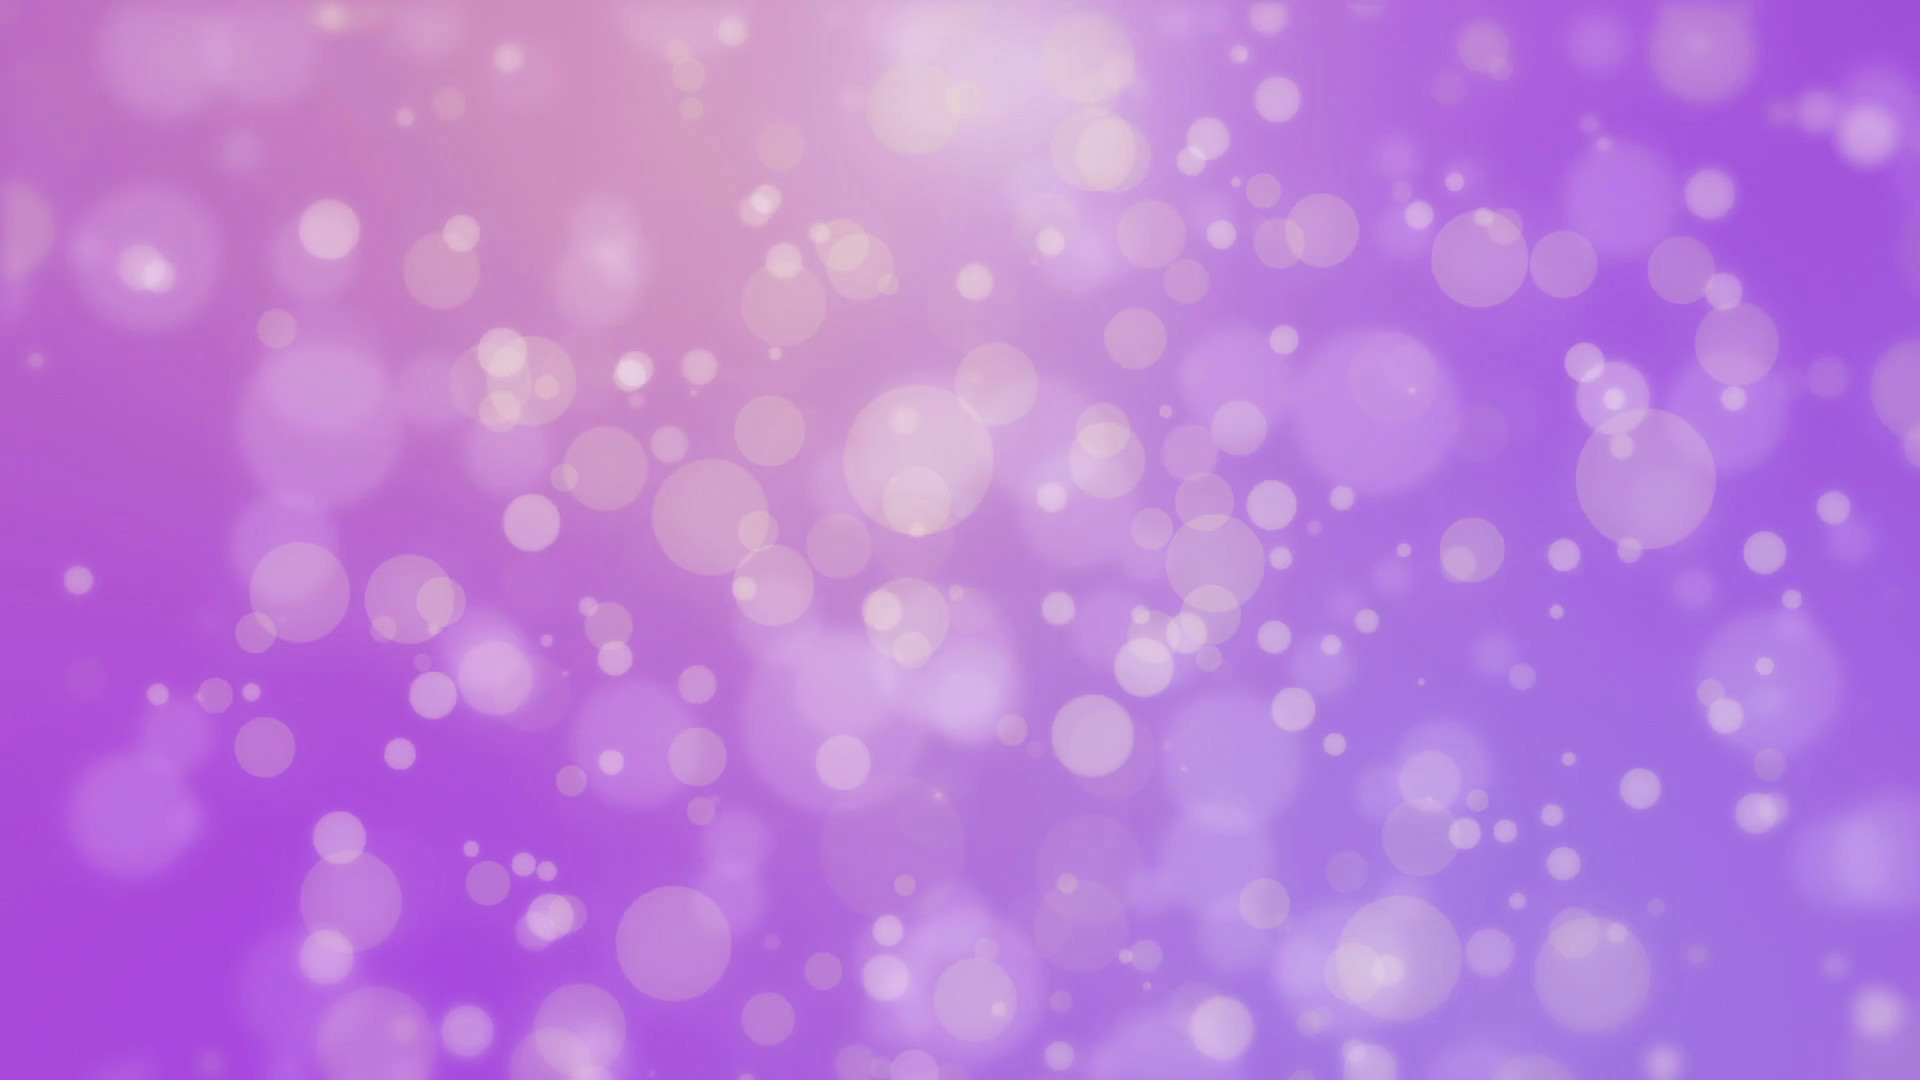 1920x1080 VIU 92 Pictures Of Pretty Backgrounds 0 18 Mb Source Â· Light Purple  Backgrounds